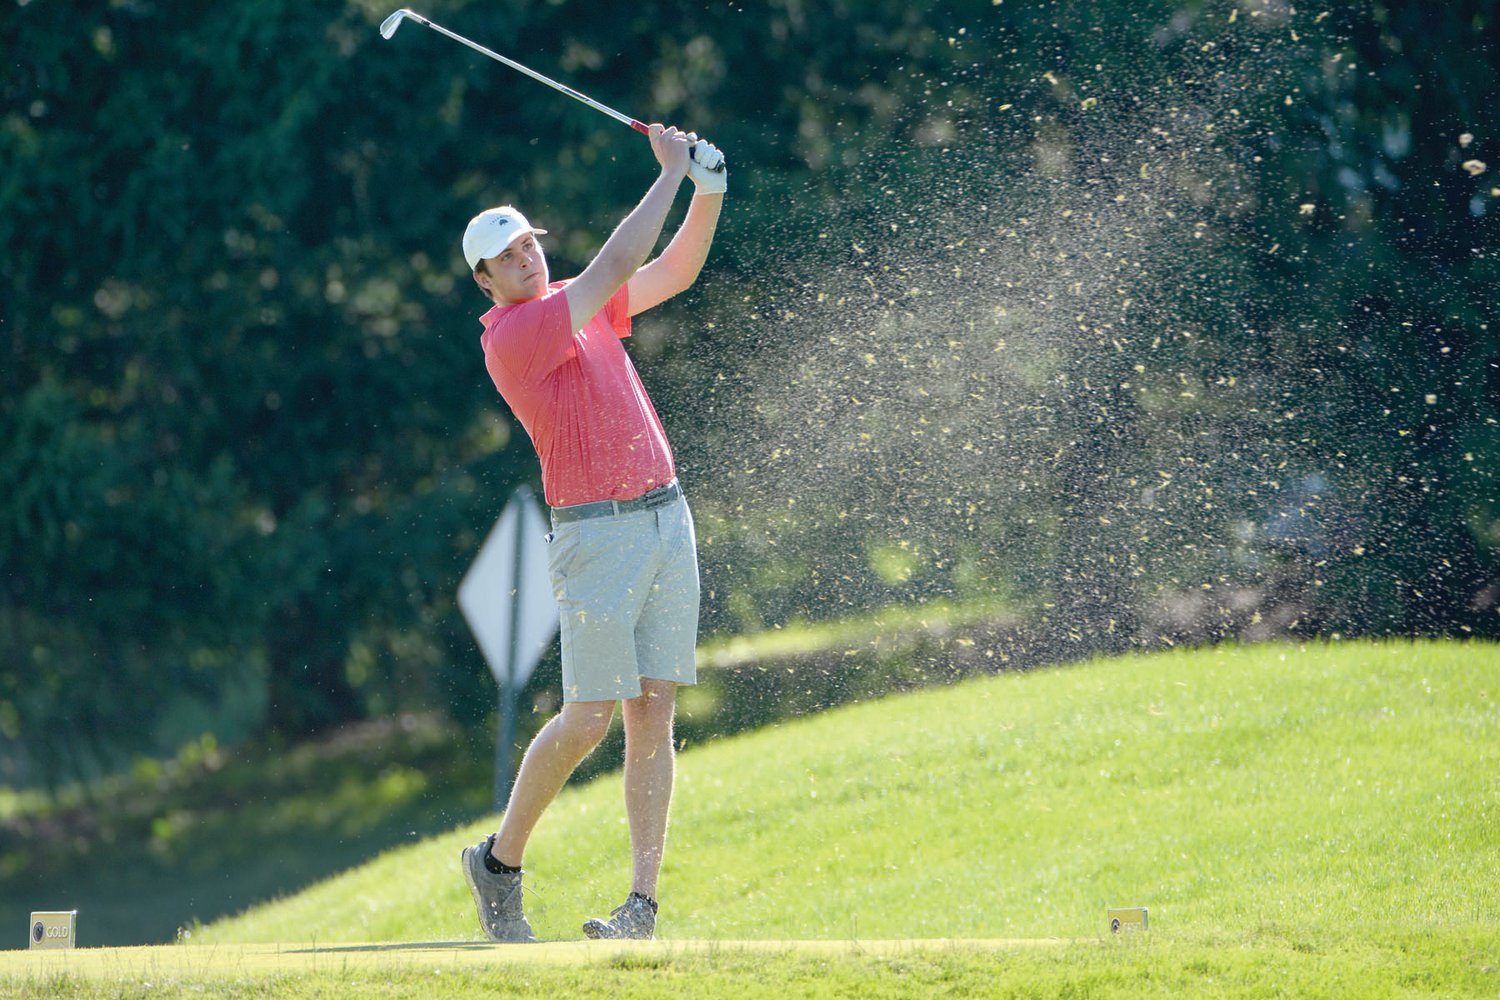 After finishing second in districts and missing the PIAA tournament by a single stroke in 2017, Central Bucks East senior Patrick Sheehan broke through this season by becoming the Patriots’ first golf champion since 2000, tying for second place at regionals and third in states.  Courtesy of Golf Association